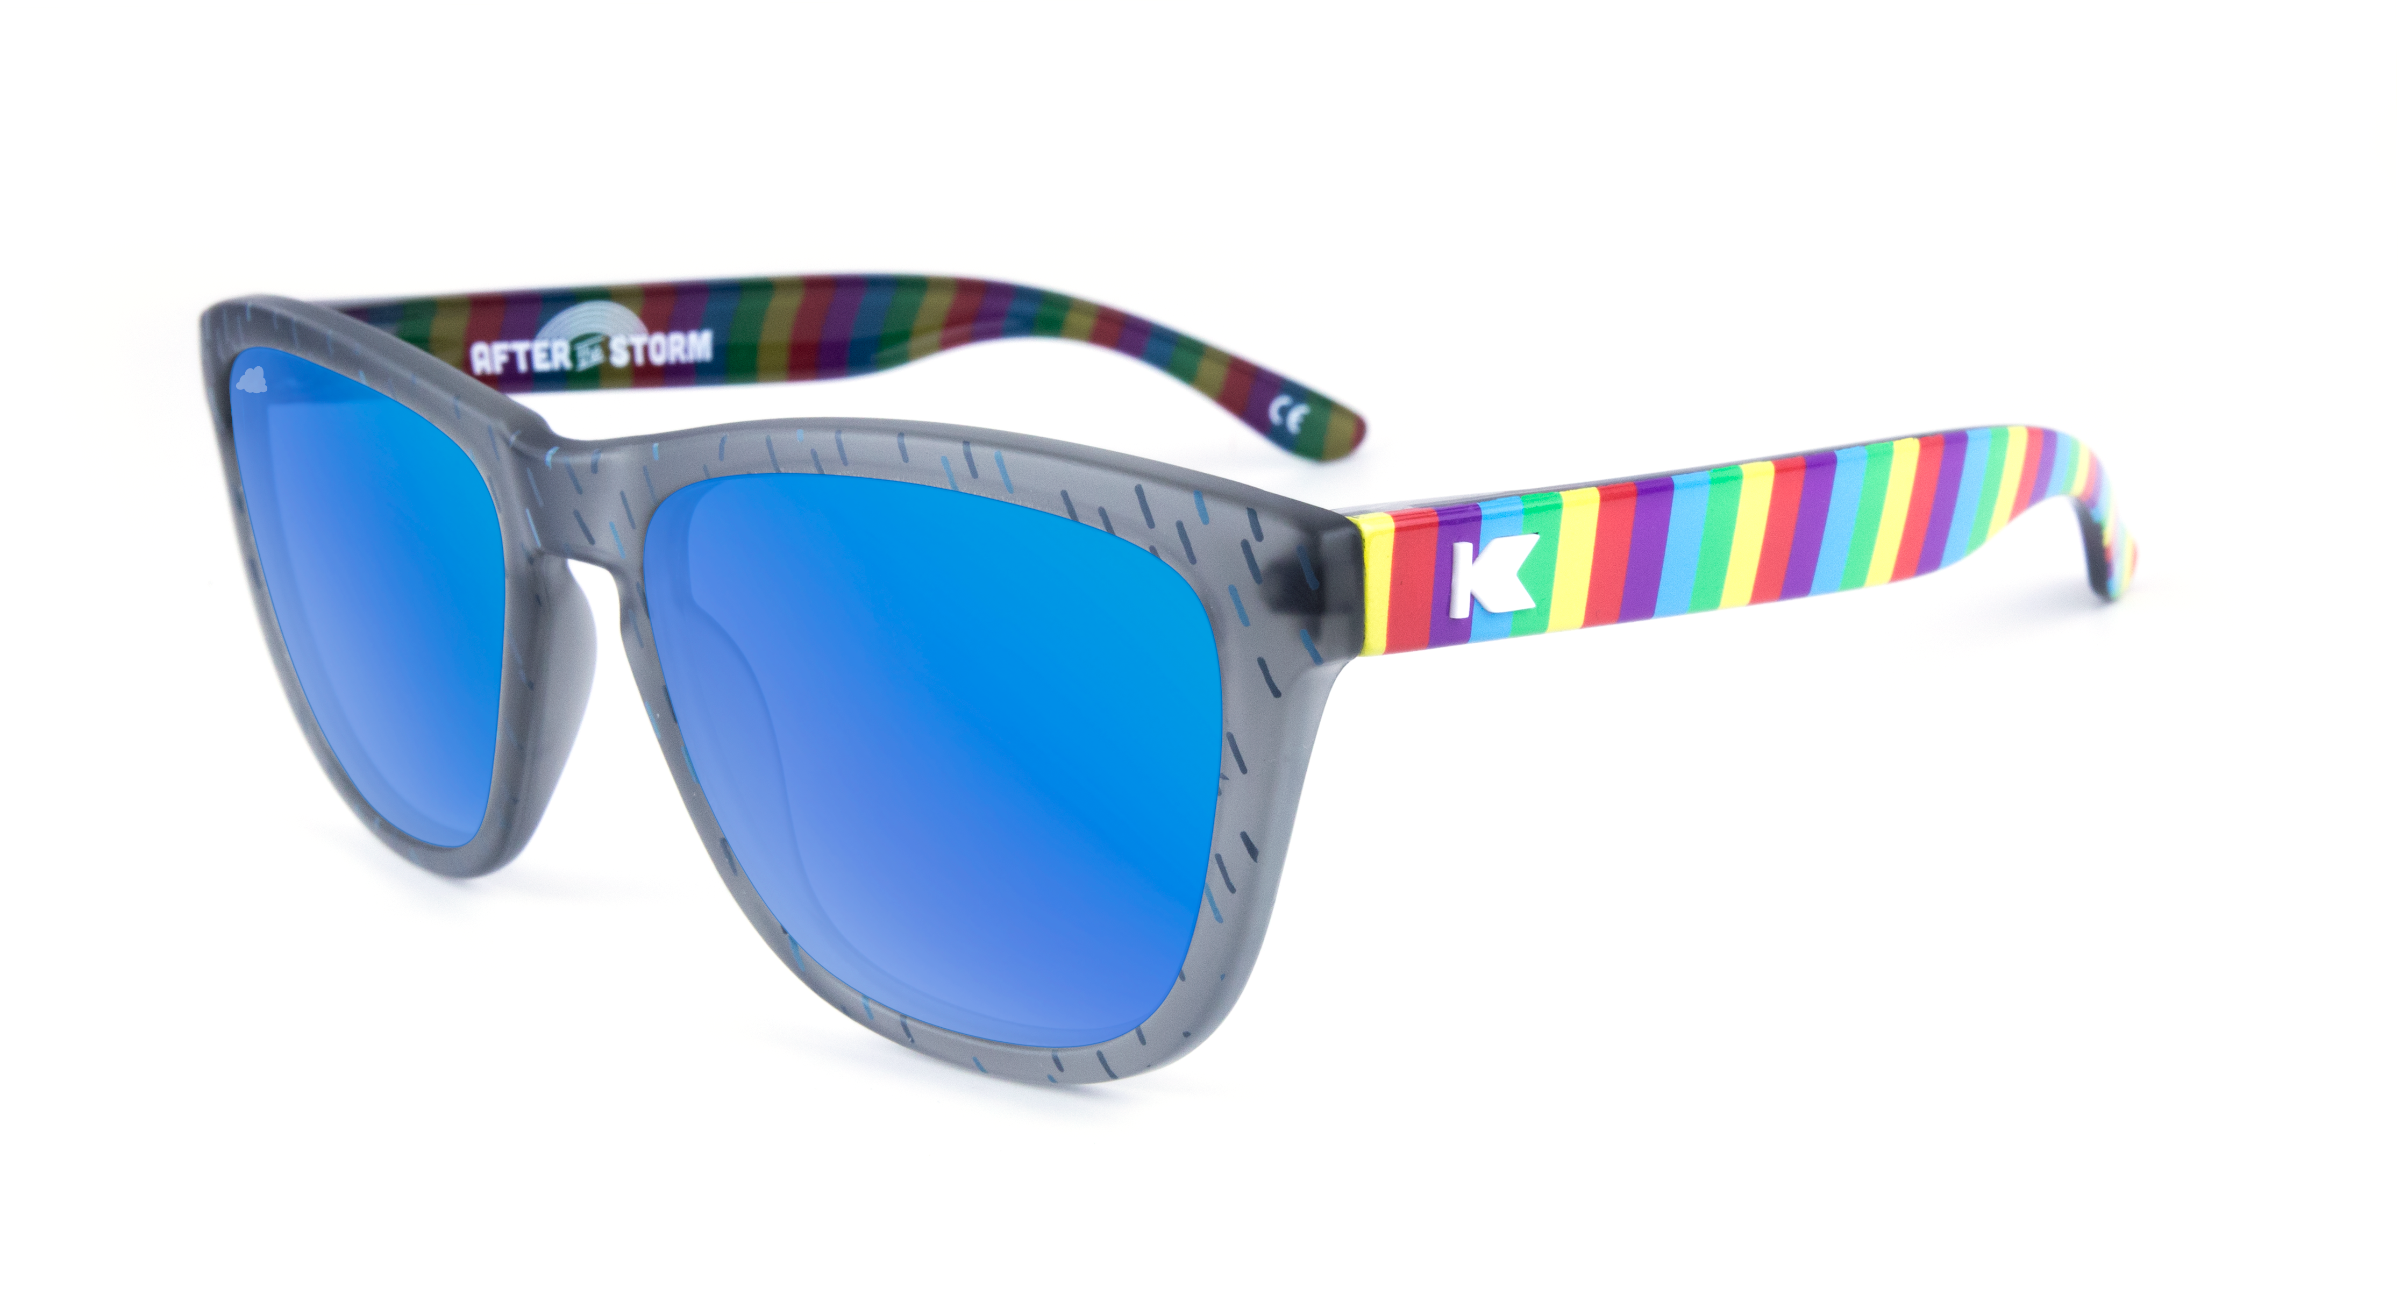 The finished "After the Storm" Knockaround Sunglasses will cost $30 and will be available for sale on April 28th, 2016.